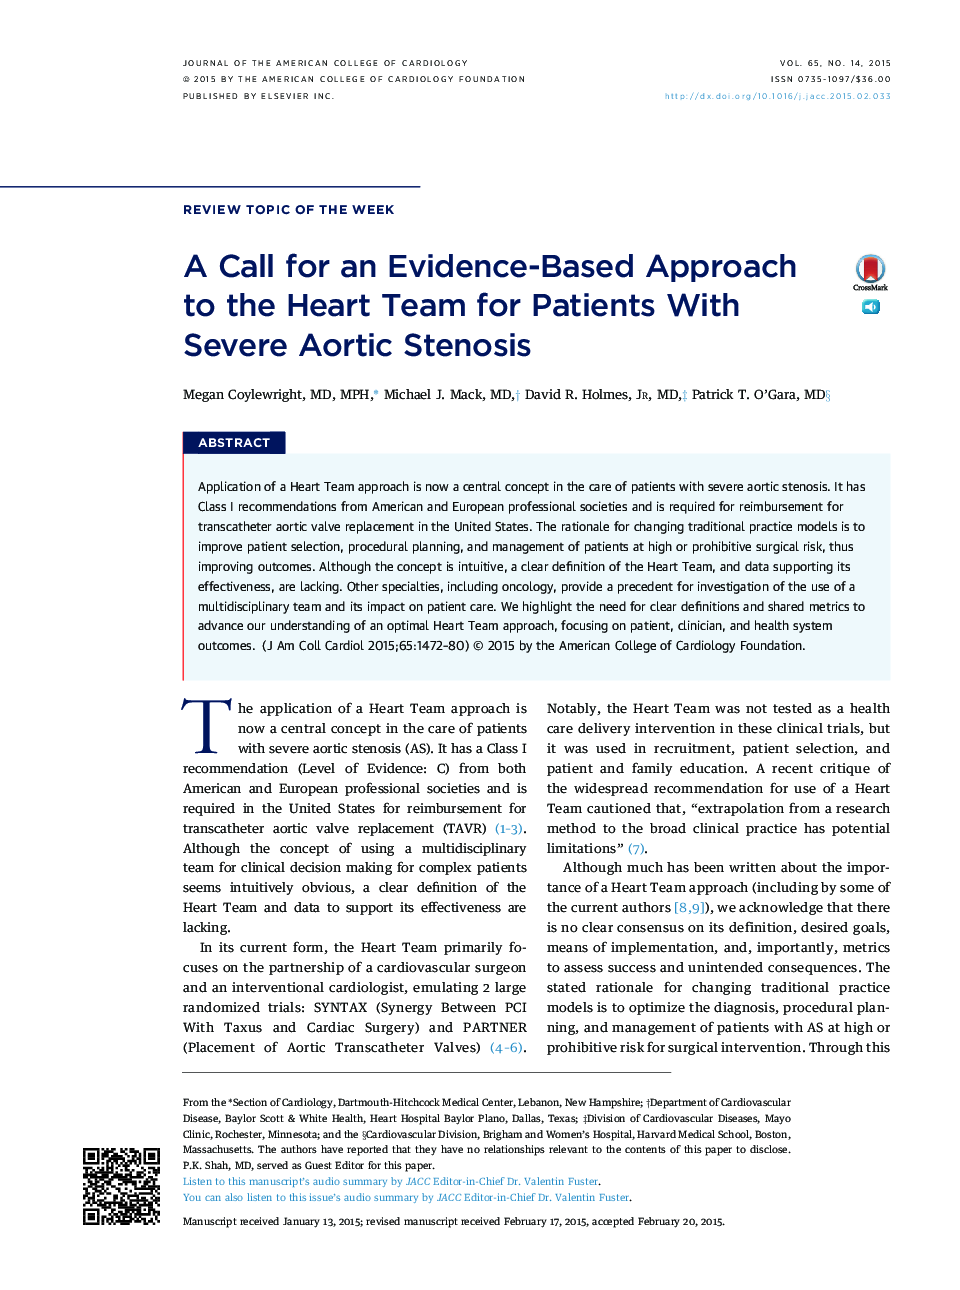 A Call for an Evidence-Based Approach to the Heart Team for Patients With Severe Aortic Stenosis 